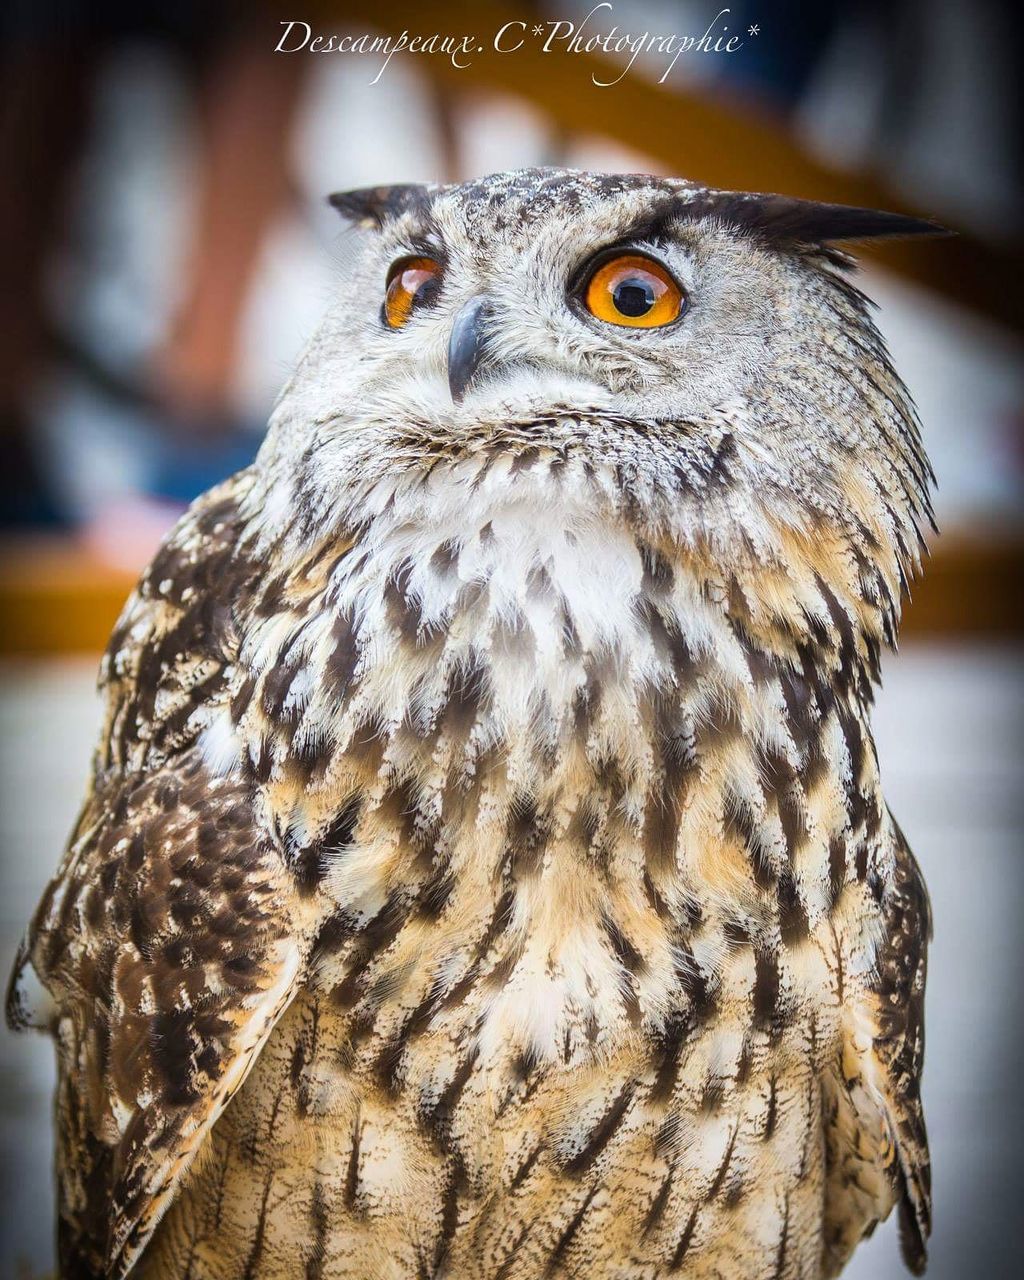 bird, animals in the wild, animal wildlife, one animal, close-up, bird of prey, animal themes, focus on foreground, looking at camera, portrait, beak, no people, owl, day, nature, outdoors, perching